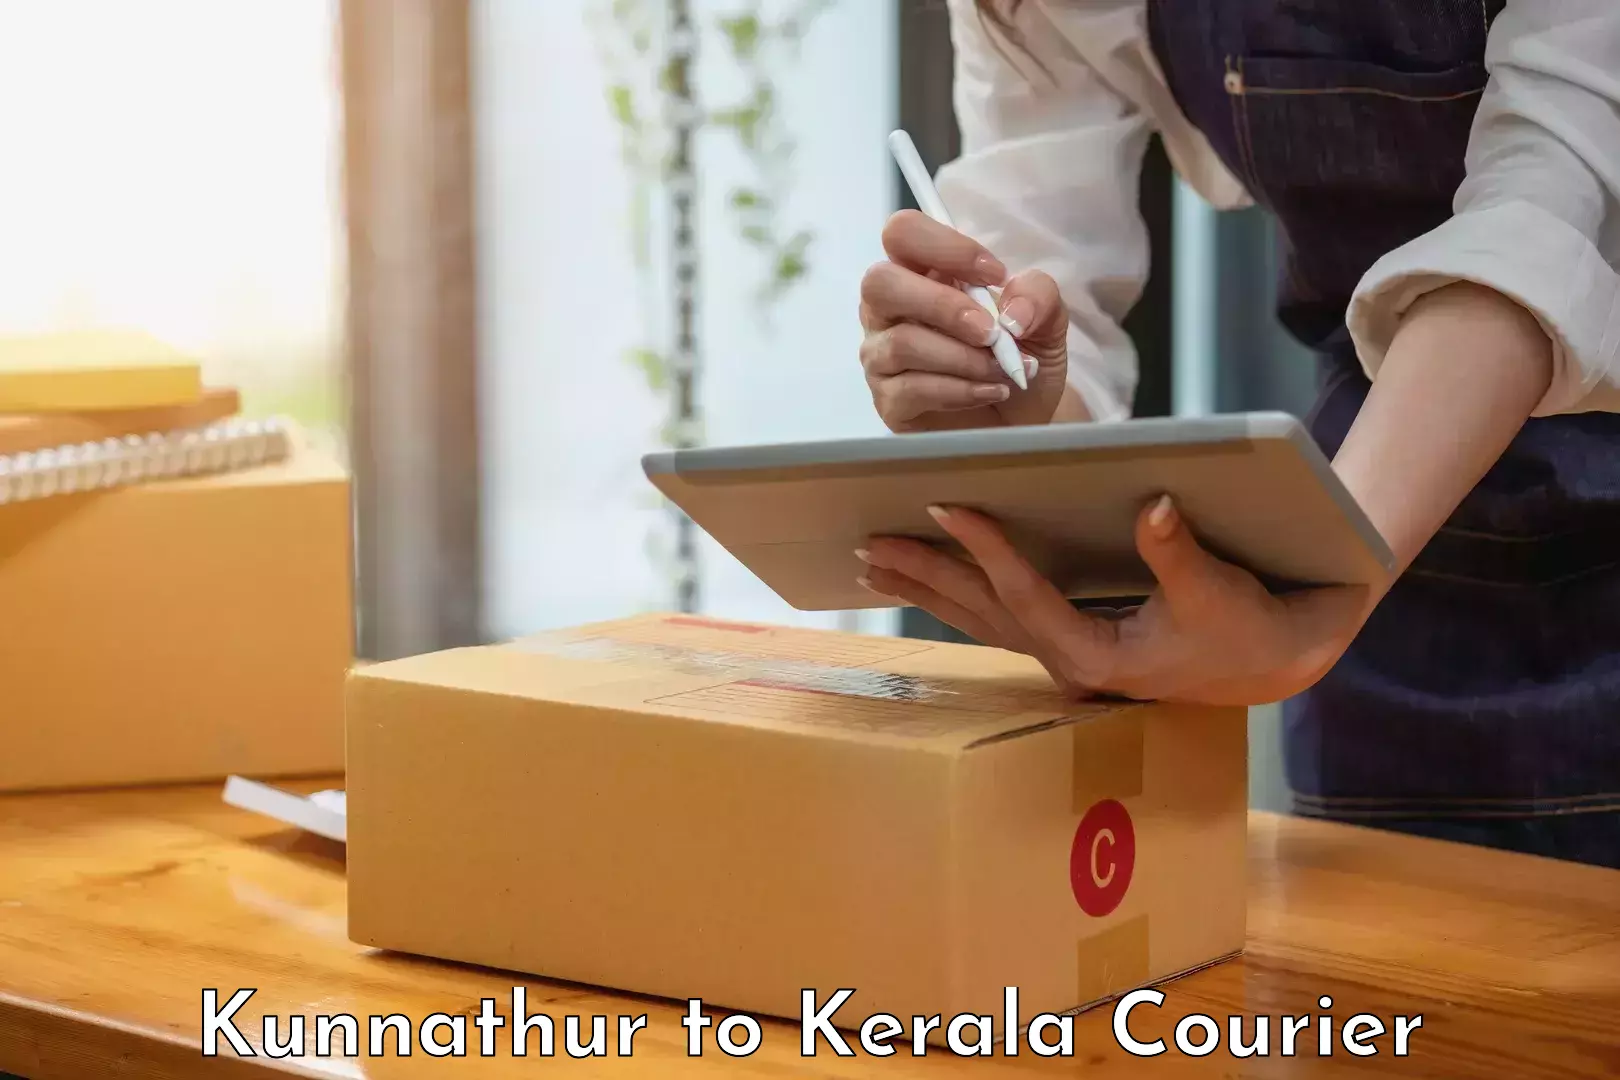 Sustainable shipping practices Kunnathur to Ernakulam